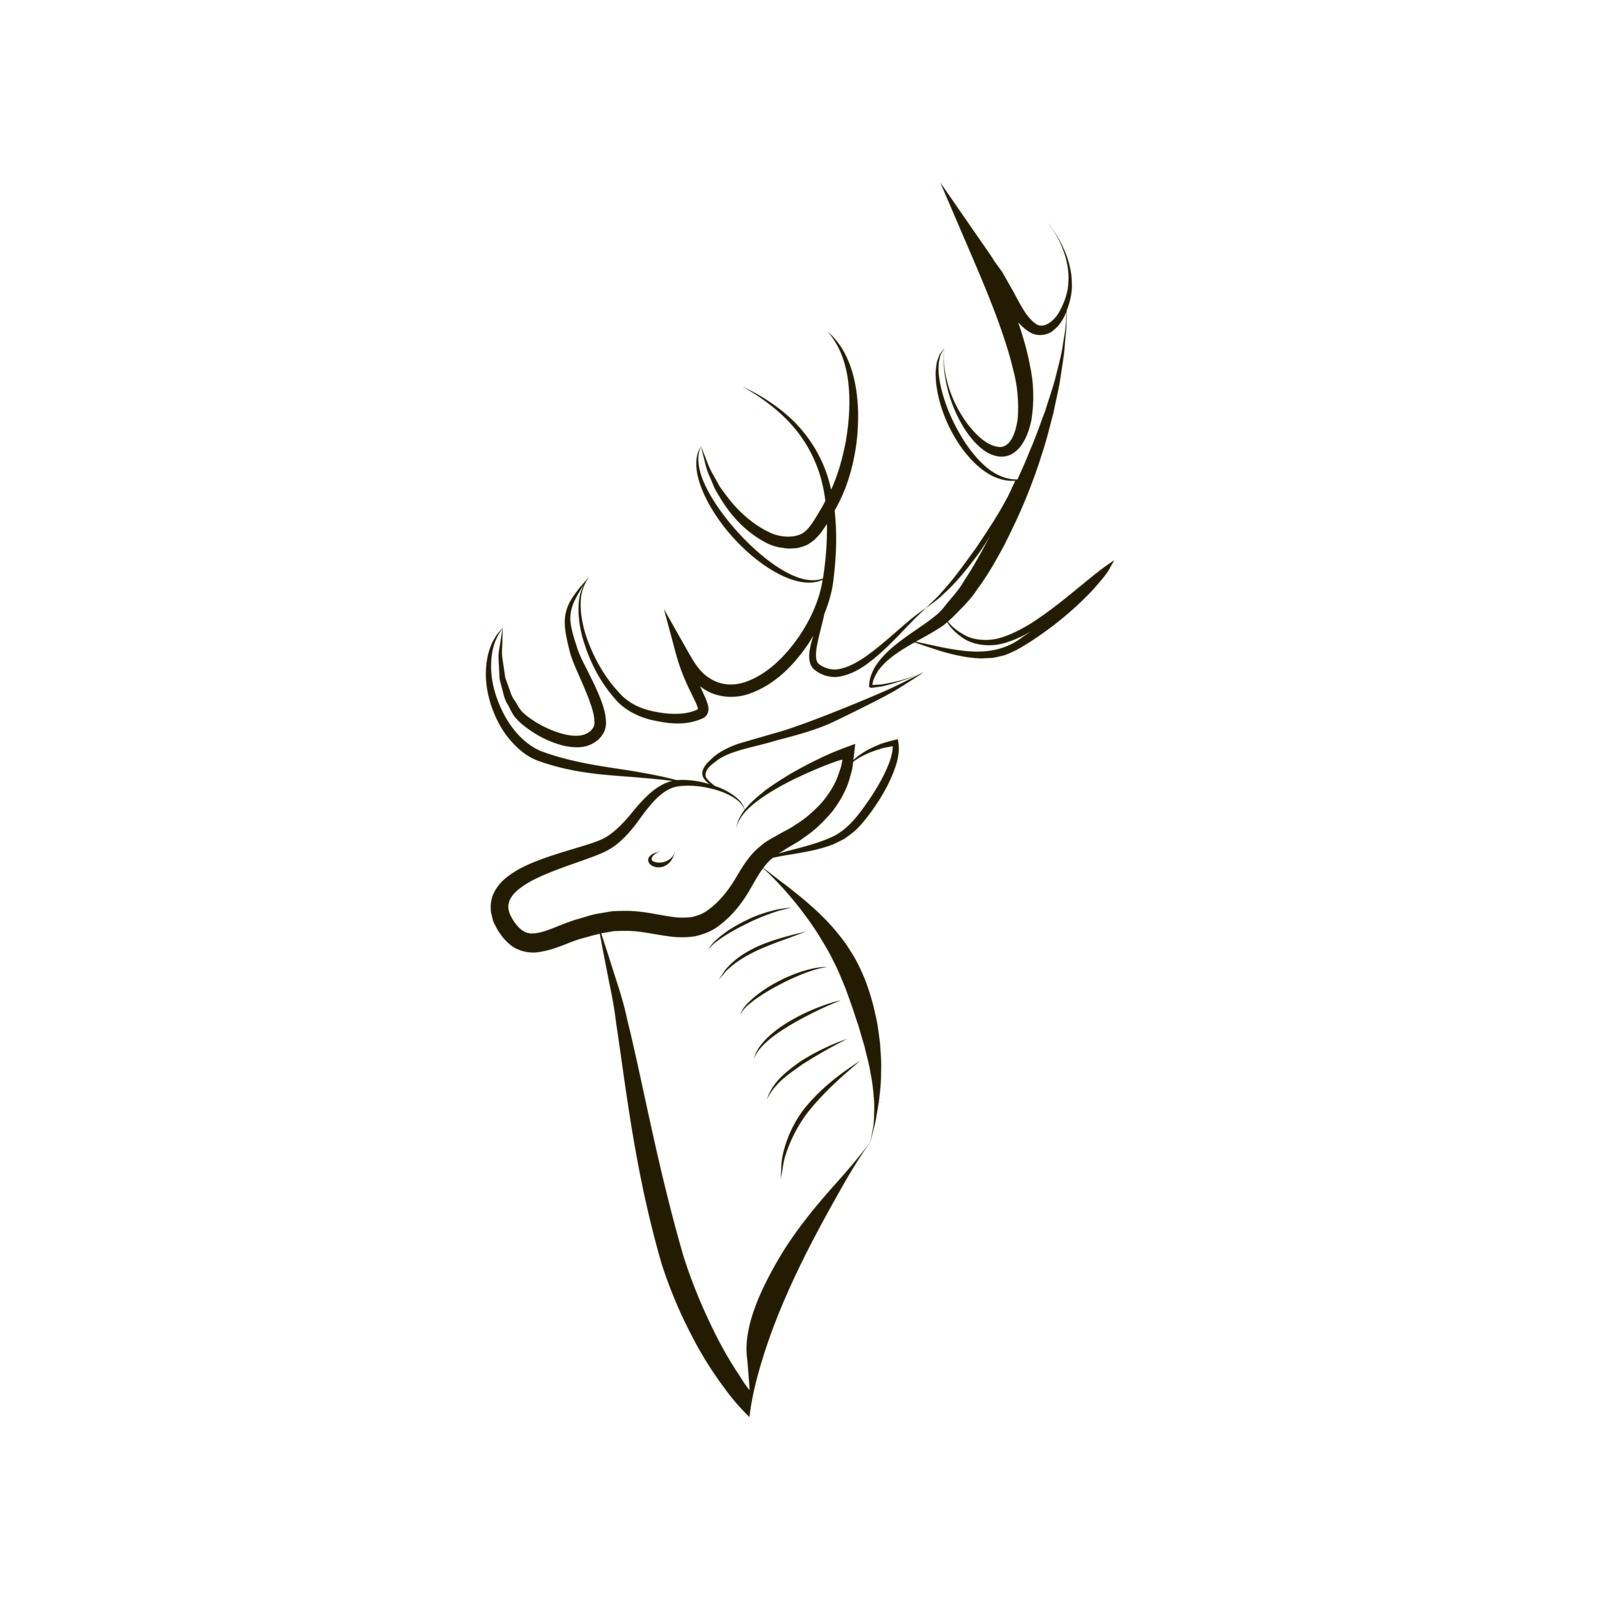 Hand drawing silhouette of a graceful deer head by Infobond